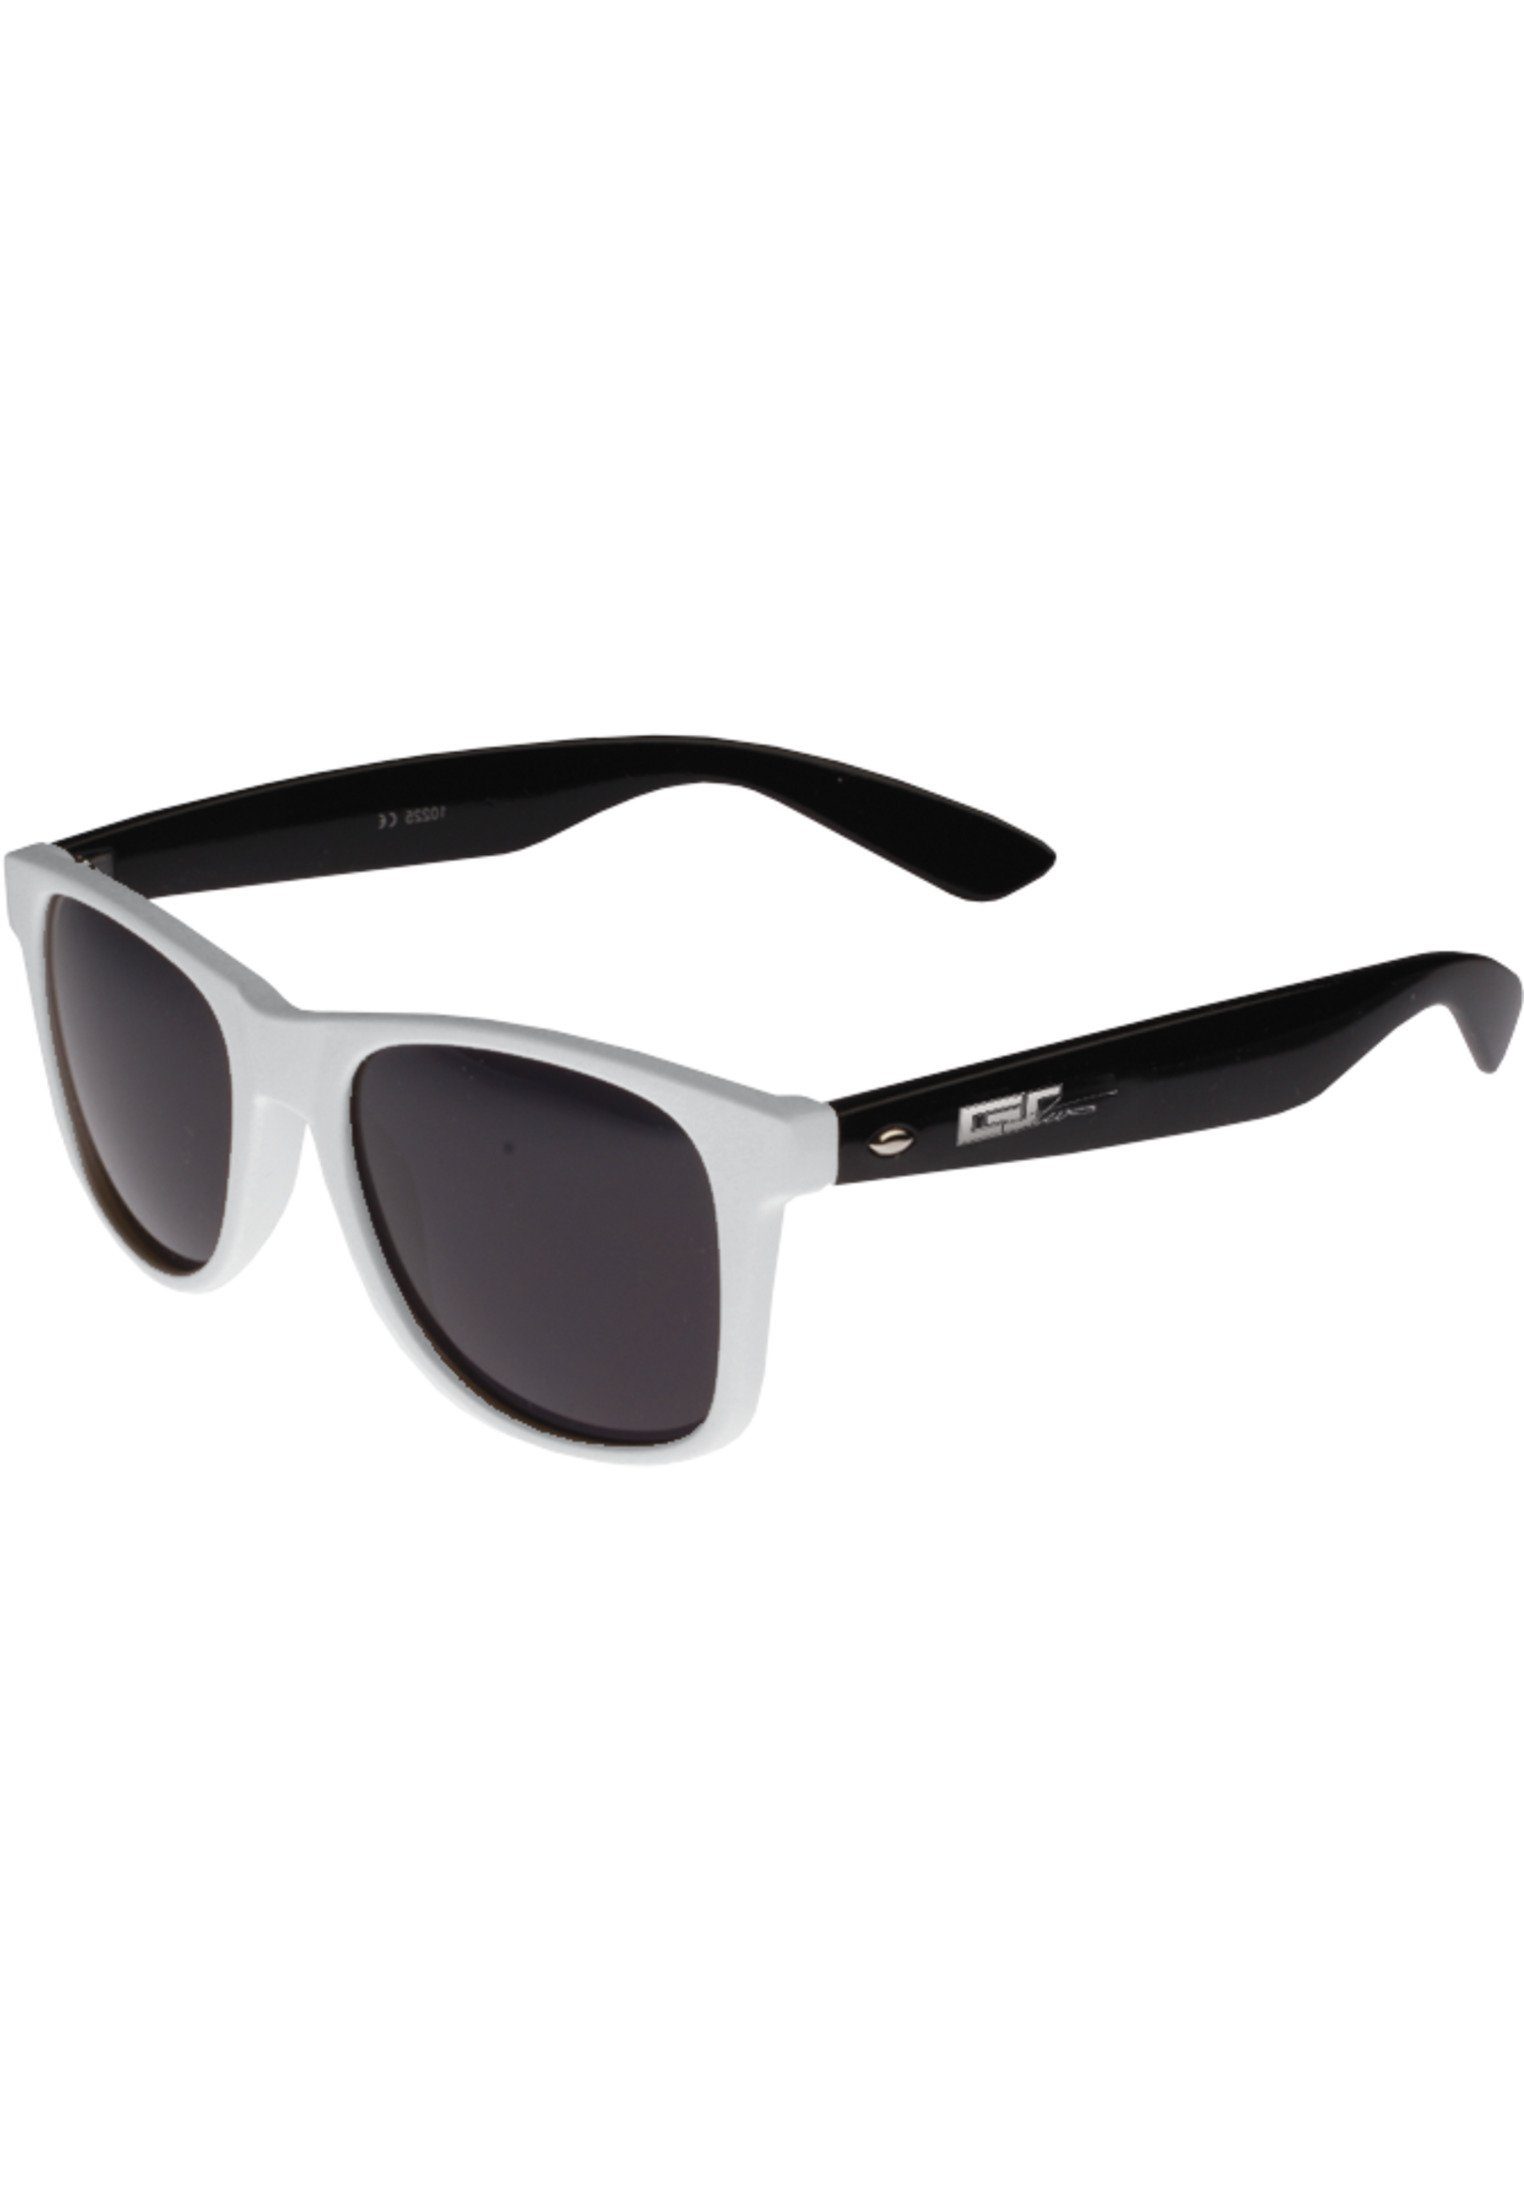 GStwo Shades Accessoires white/black Groove MSTRDS Sonnenbrille